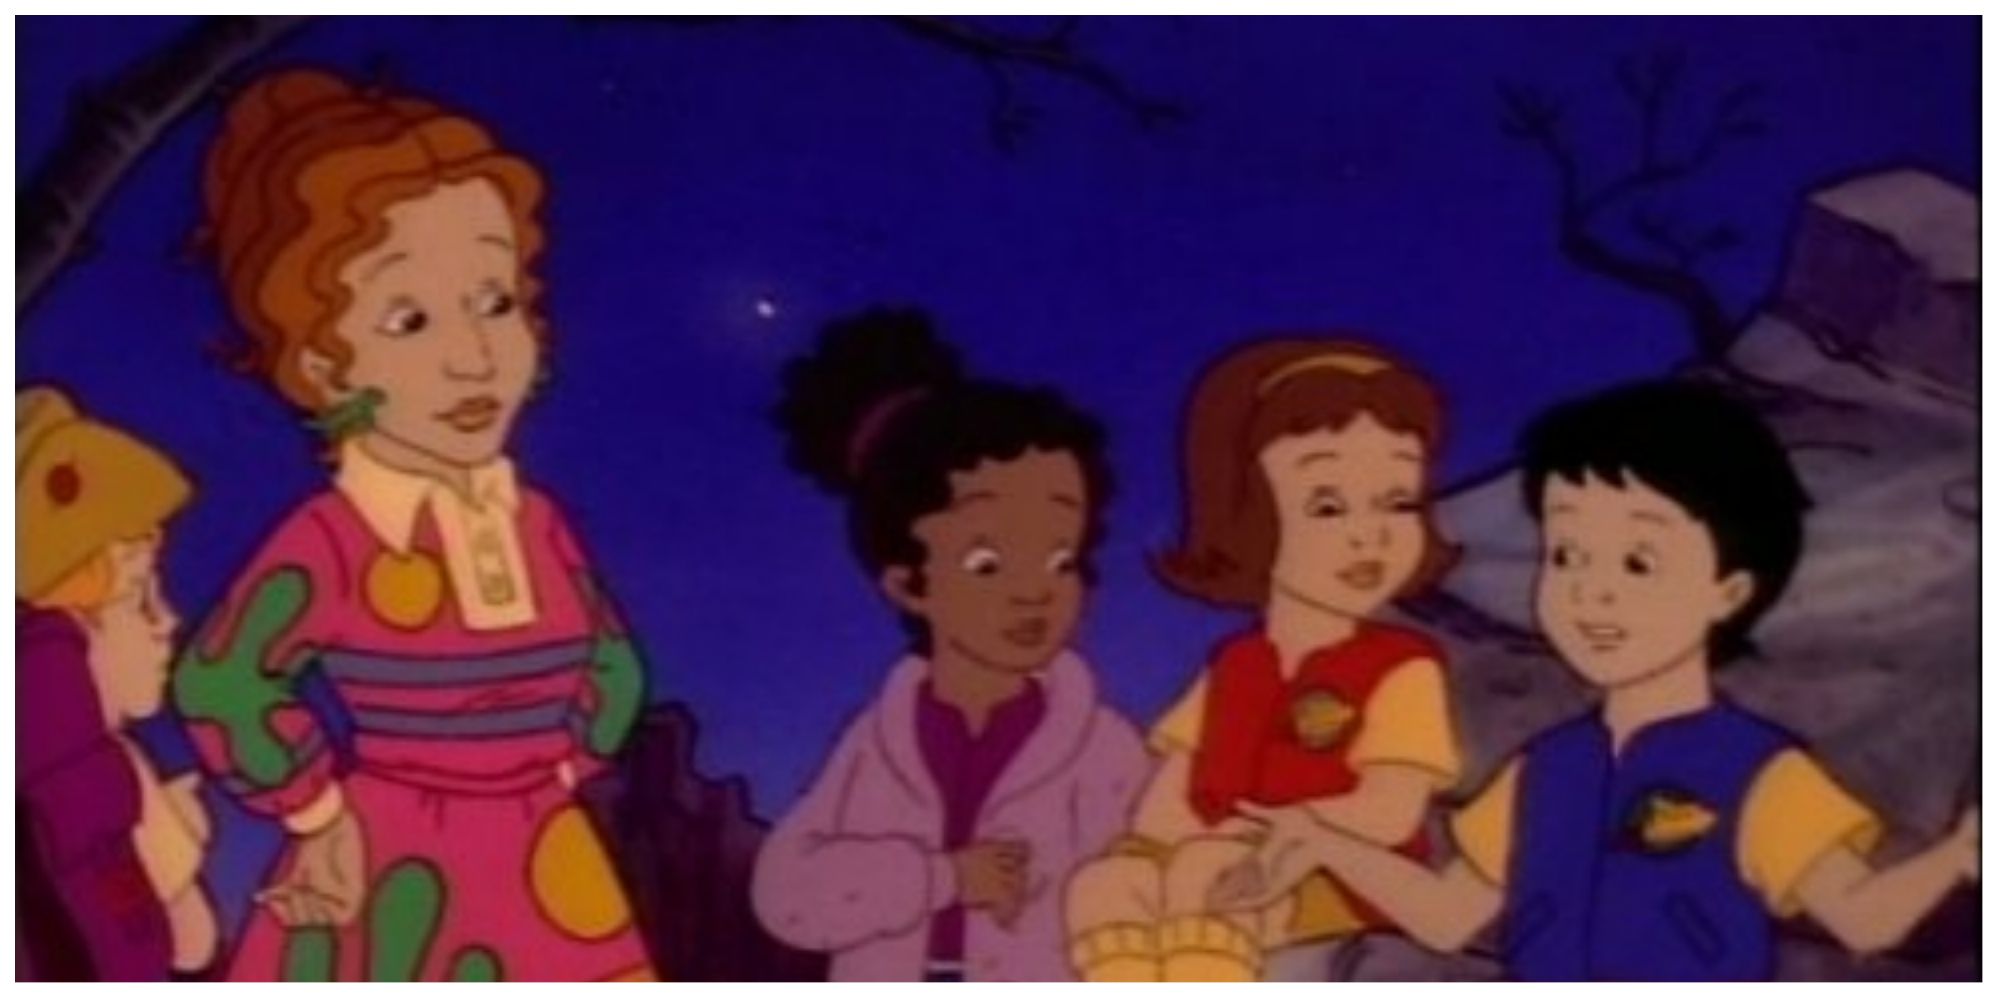 Miss Frizzle and the kids in The Magic School Bus